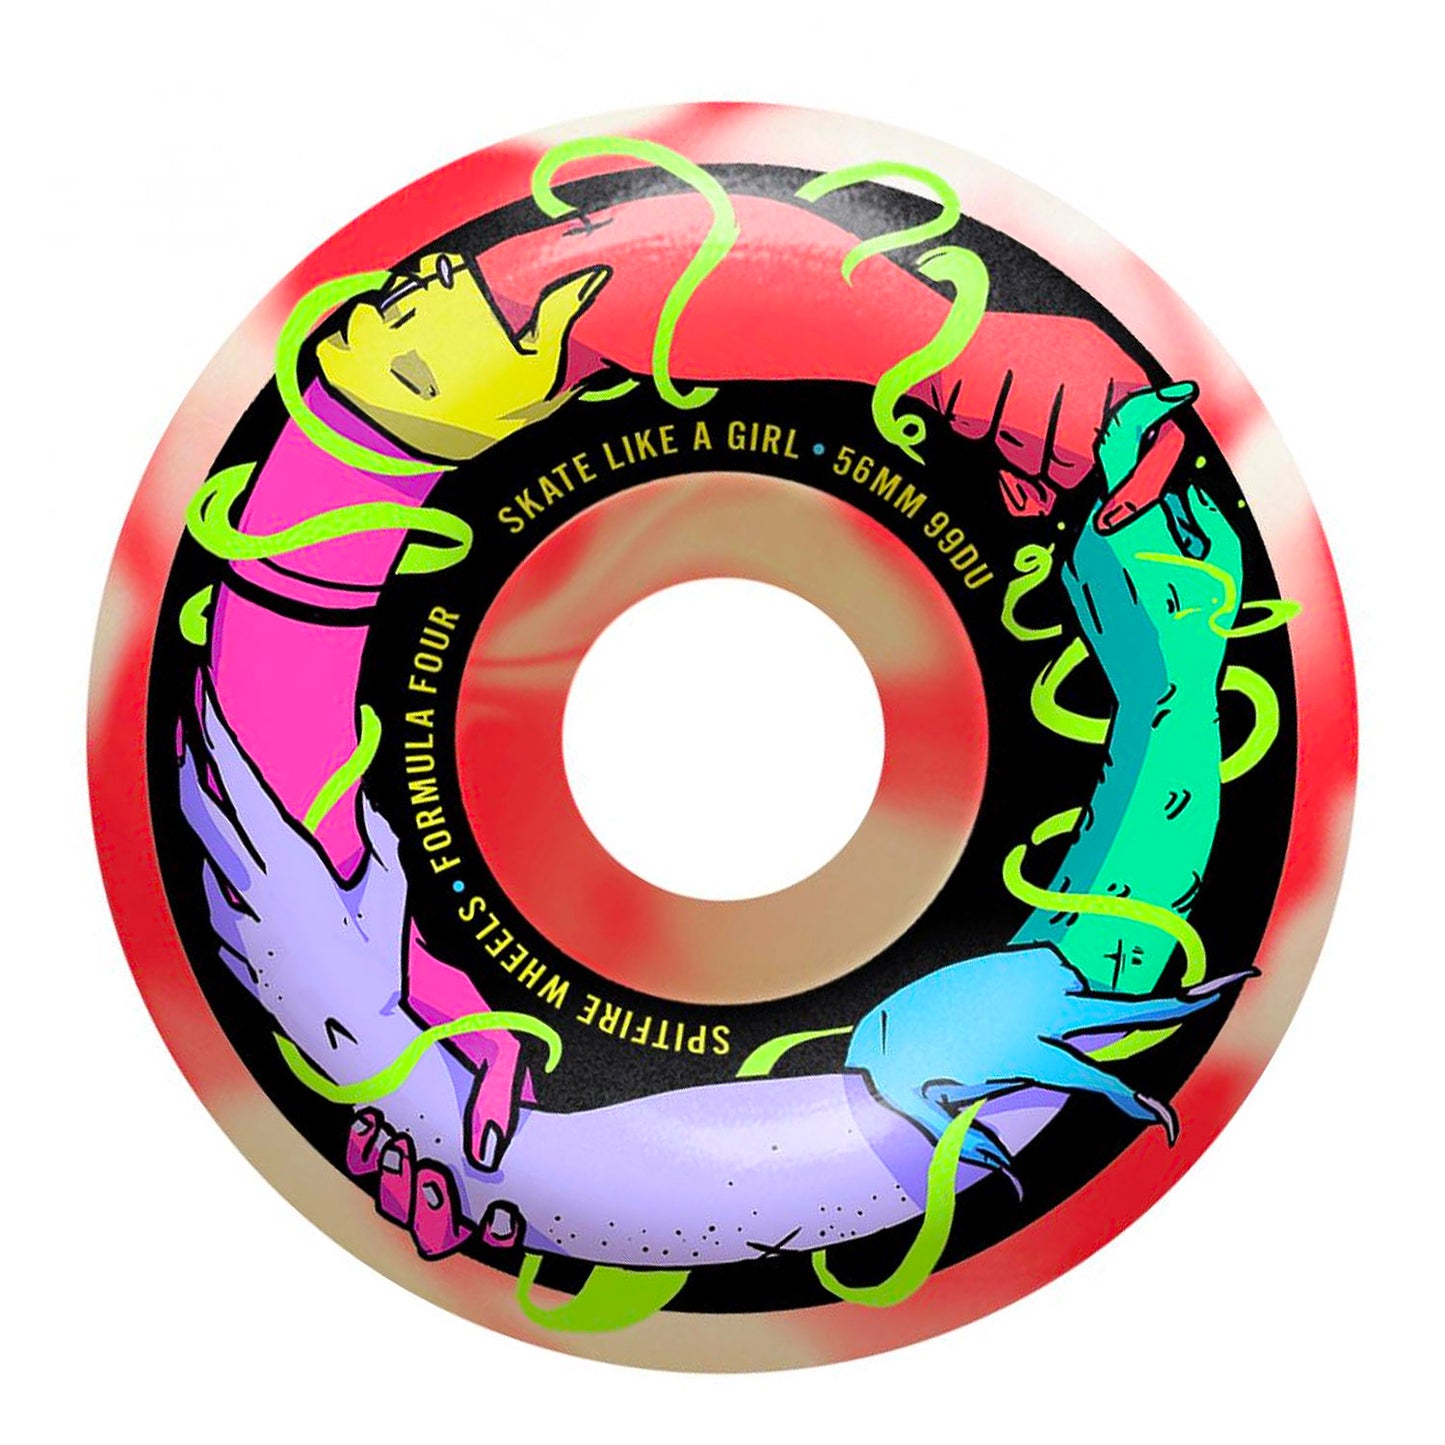 Spitfire - 56mm - 99a Friends Of Sk8 Like a Girl CO - White / Pink - Prime Delux Store